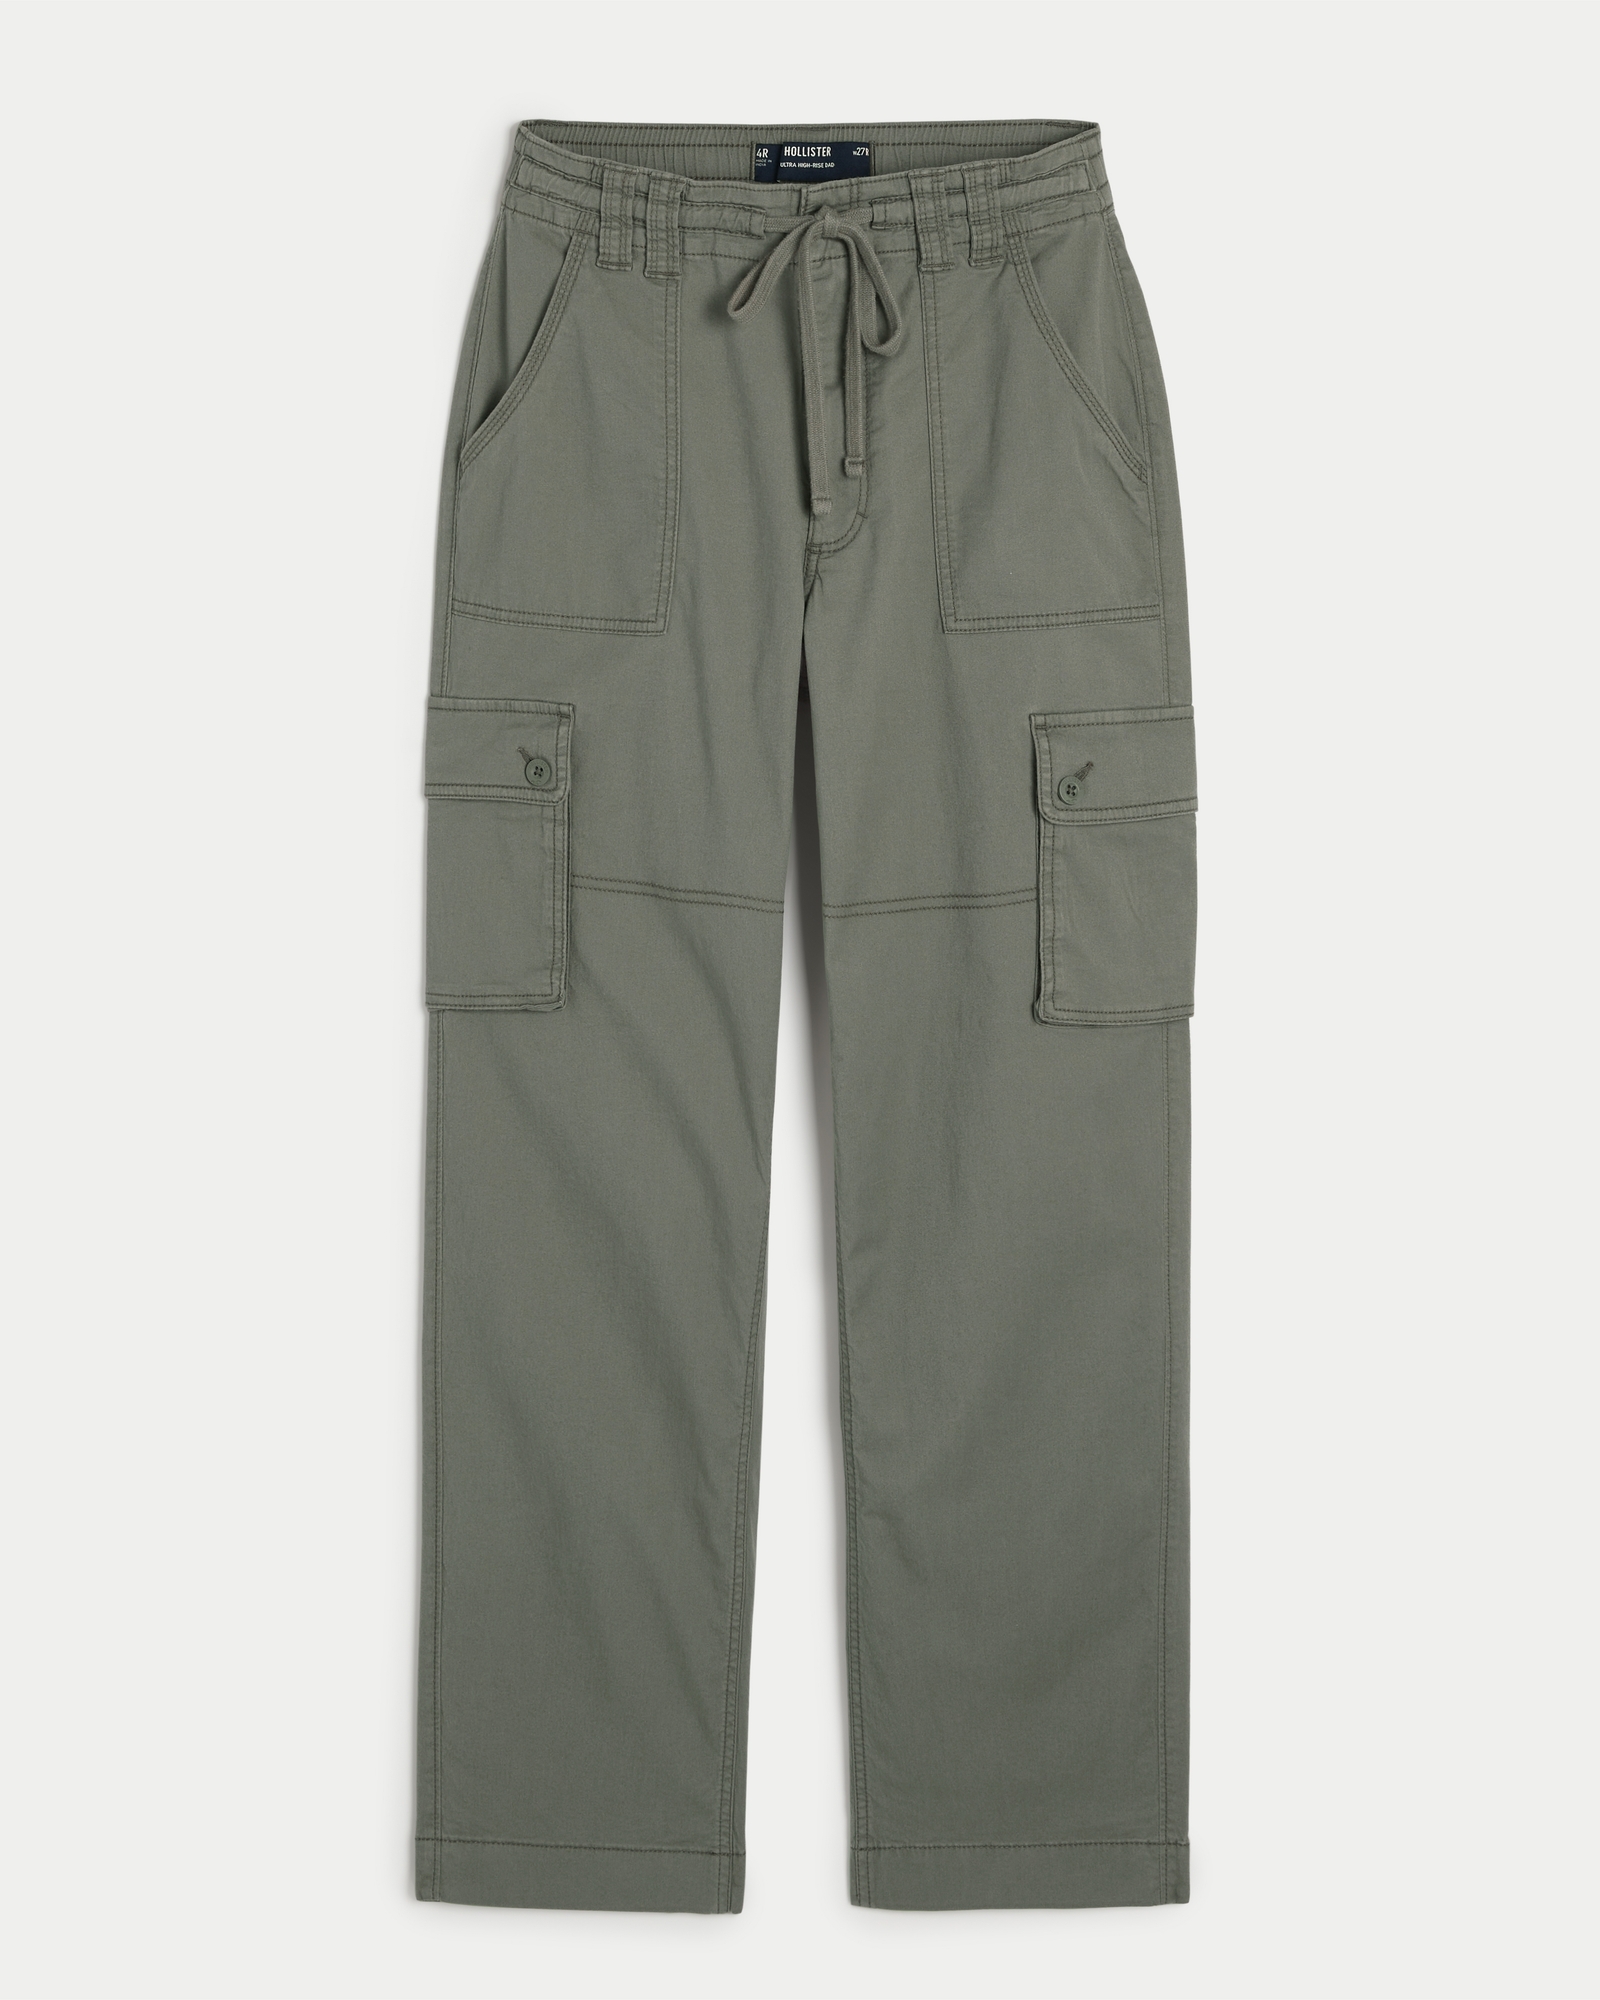 highly recommend these uniqlo ankle pants if you're looking for work p